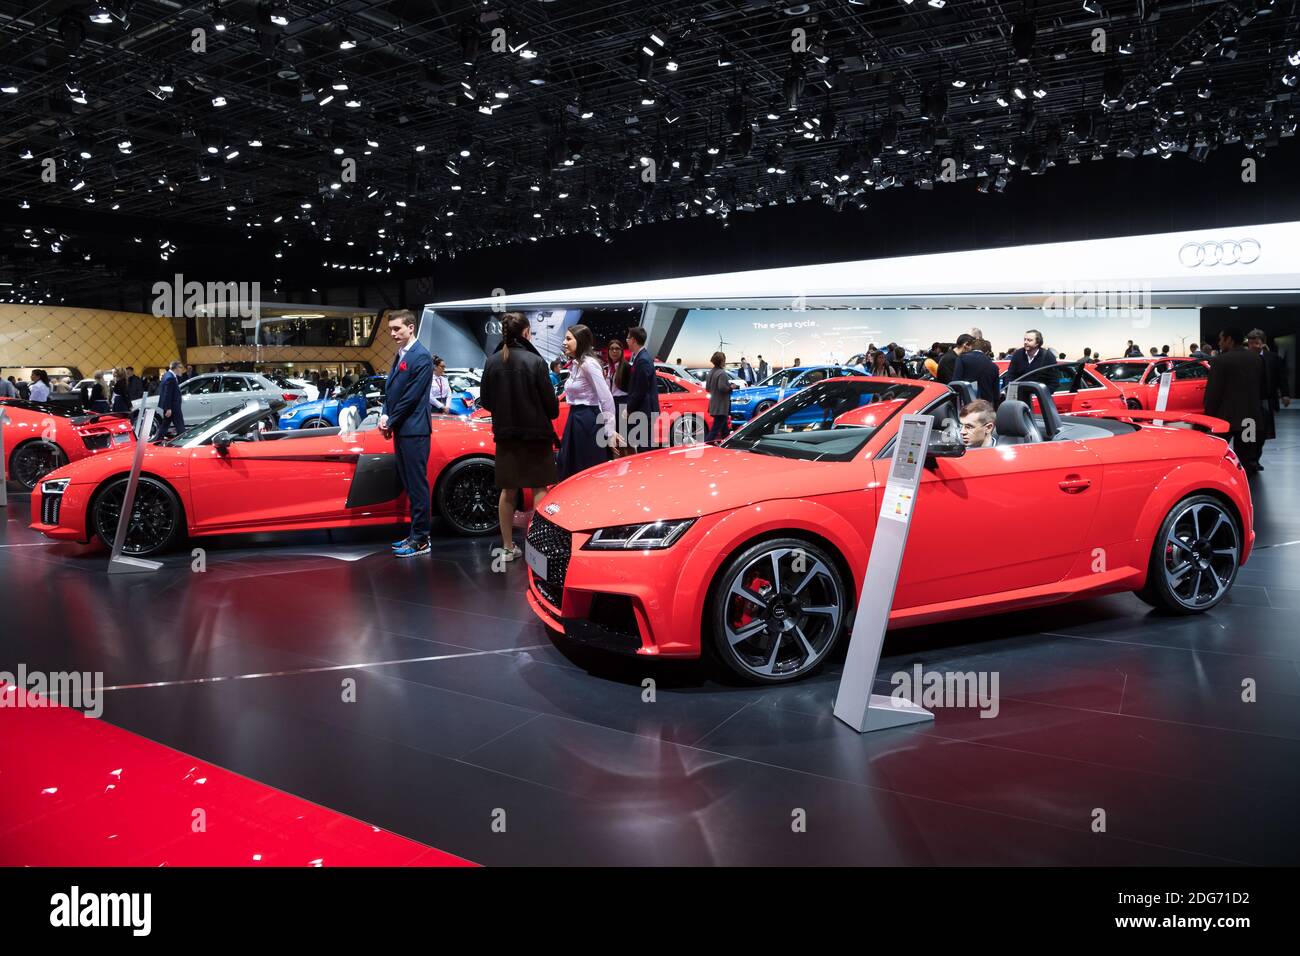 Stand Audi is on display during the 87th Geneva International Motor Show at Palexpo Exhibition Centre in Geneva, Switzerland on March 08, 2017. The show opens to the public on March 9 to 19. Photo by Loona/ABACAPRESS.COM Stock Photo